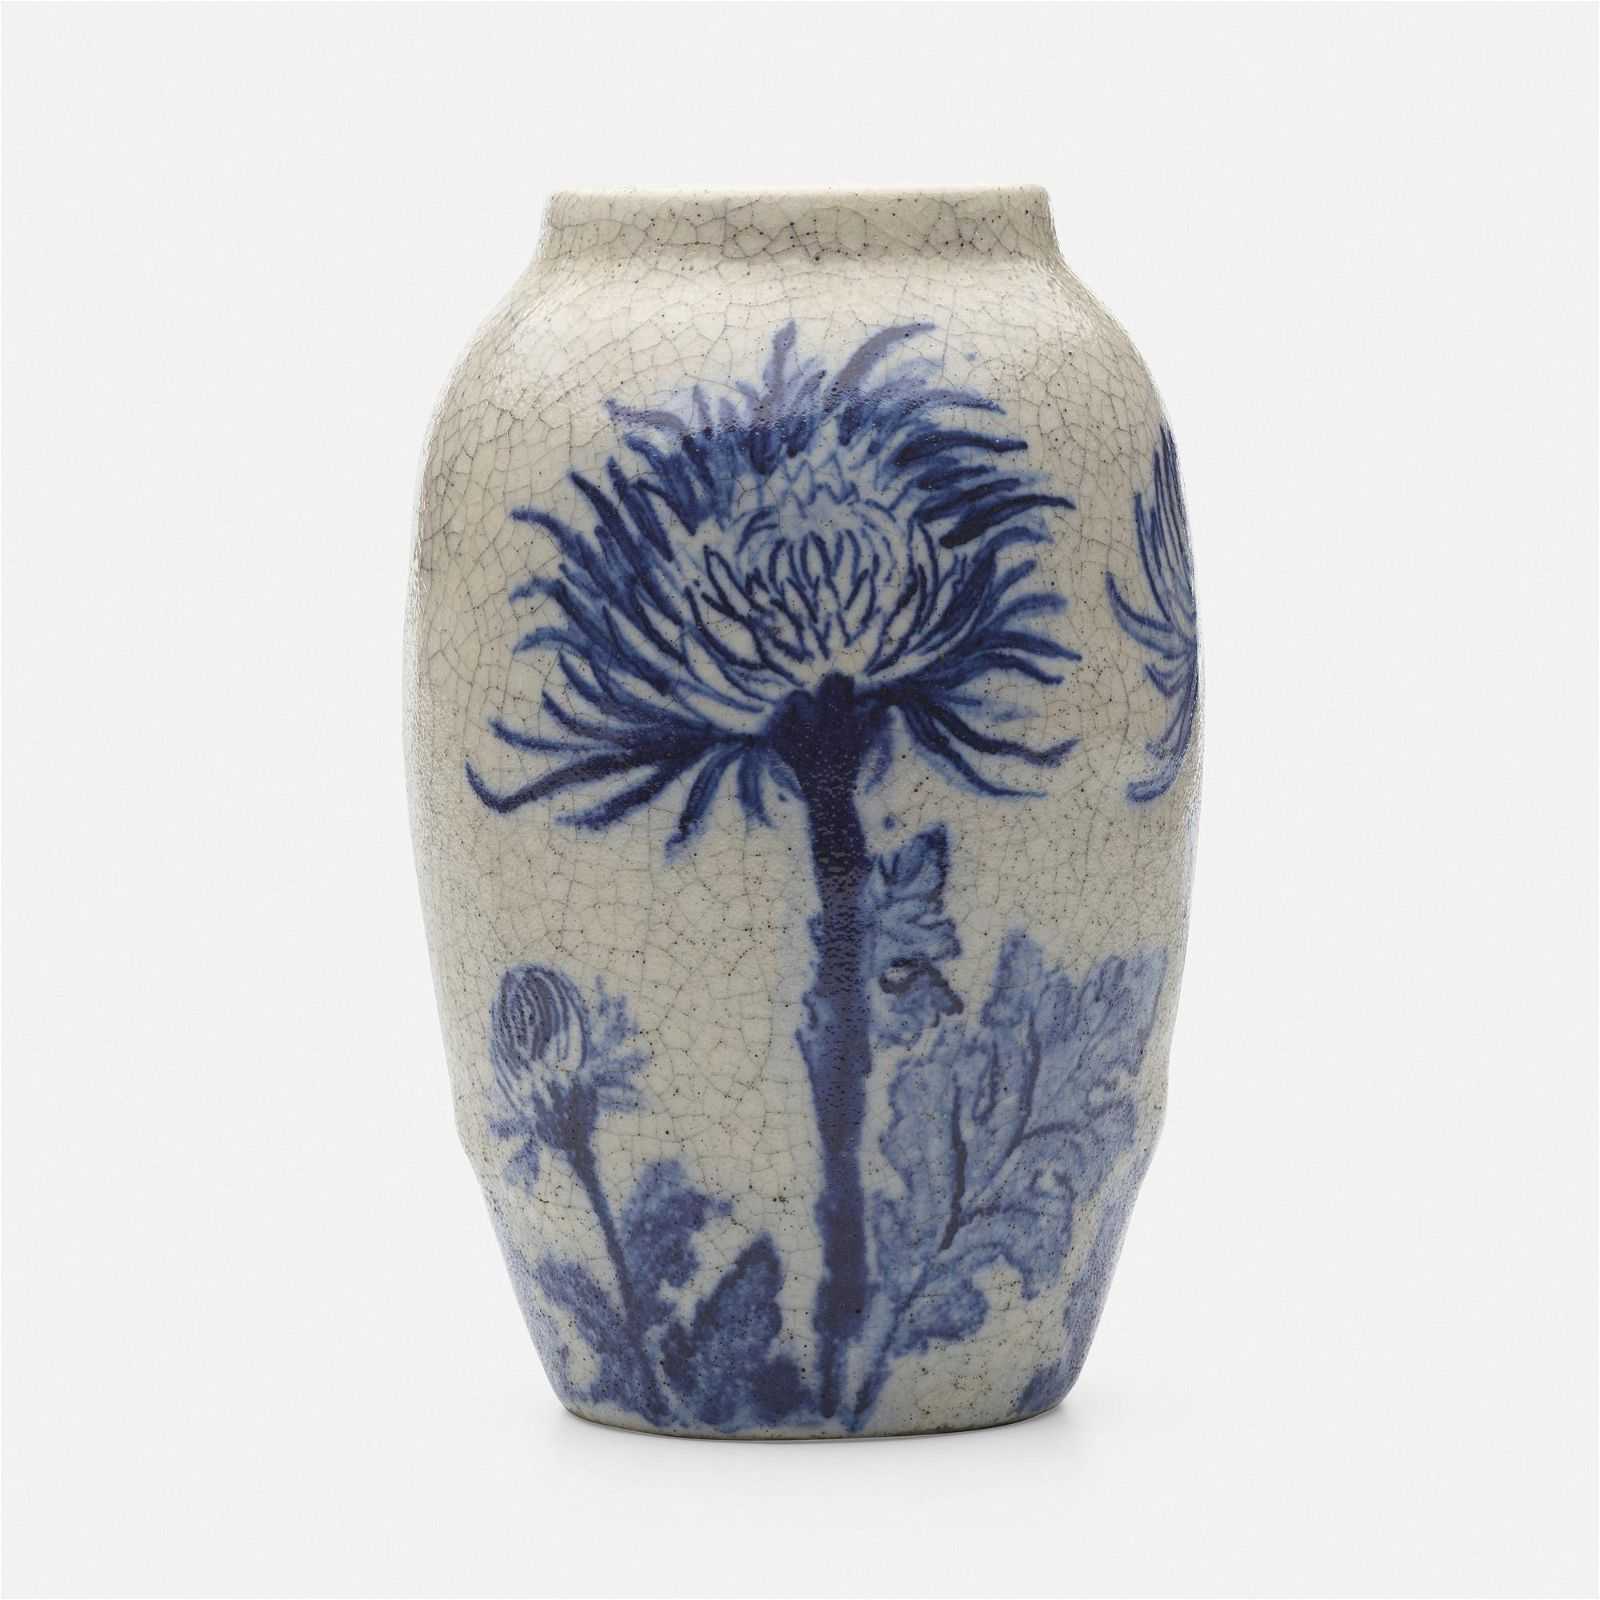 Hugh Robertson made this crackle-glazed stoneware vase for Dedham Pottery between 1898 and 1908, decorating it in cobalt with images of sunflowers. It secured $9,000 plus the buyer’s premium in February 2023. Image courtesy of Rago Arts and Auction Center and LiveAuctioneers.